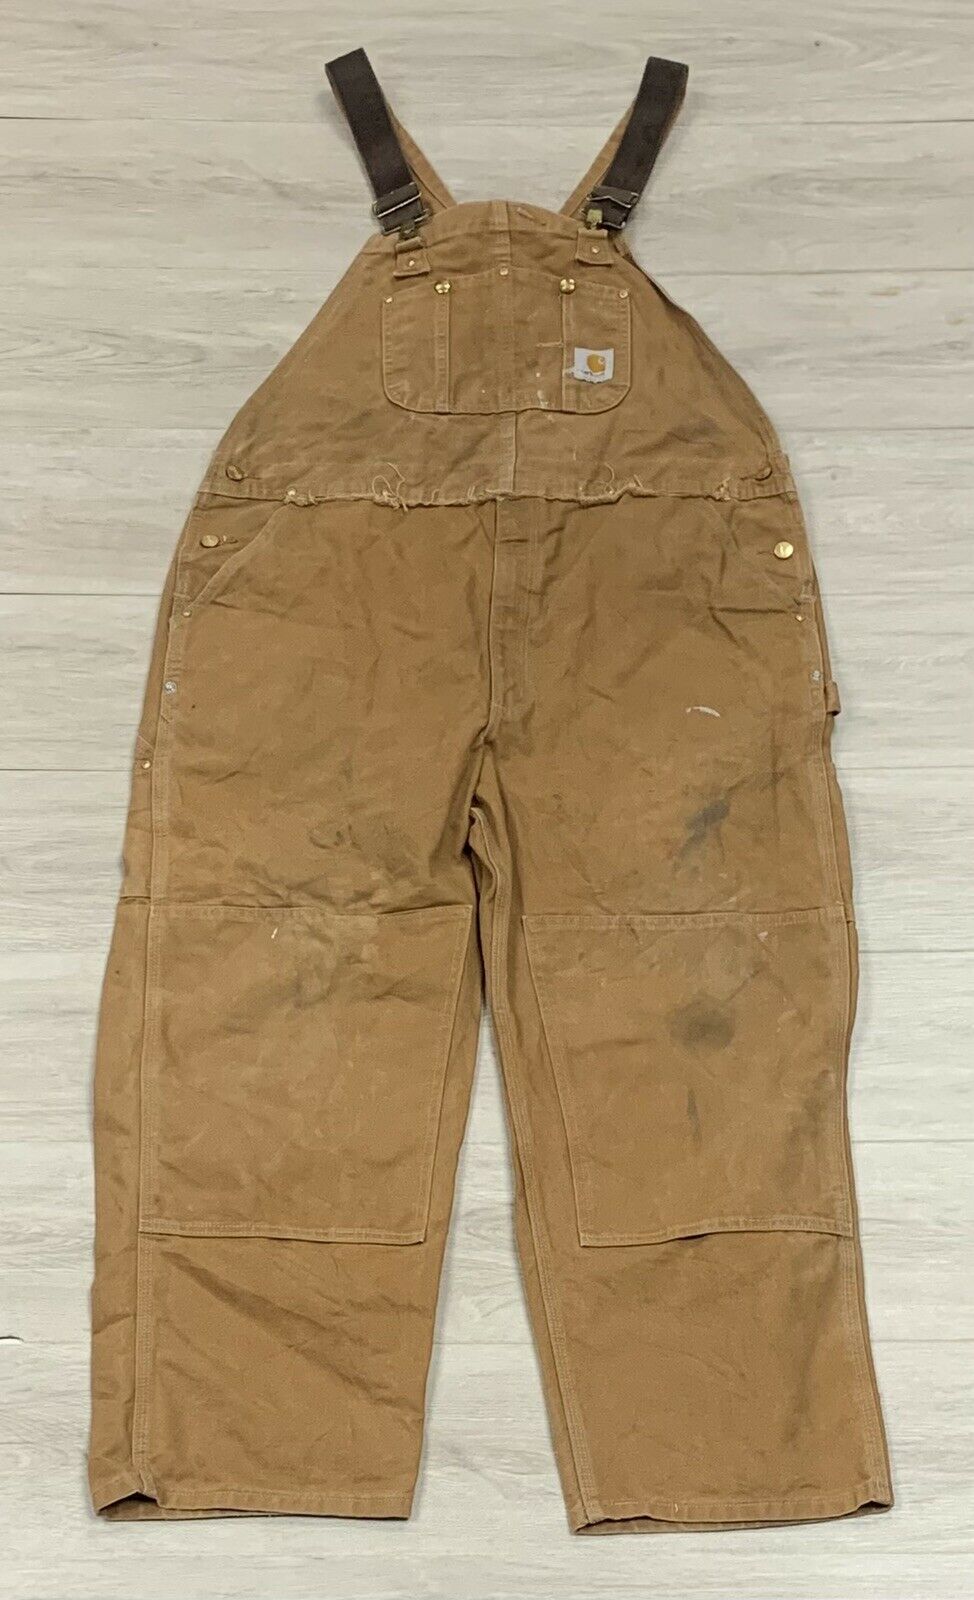 Vintage Carhartt Double Knee Canvas Overalls Size 44.5